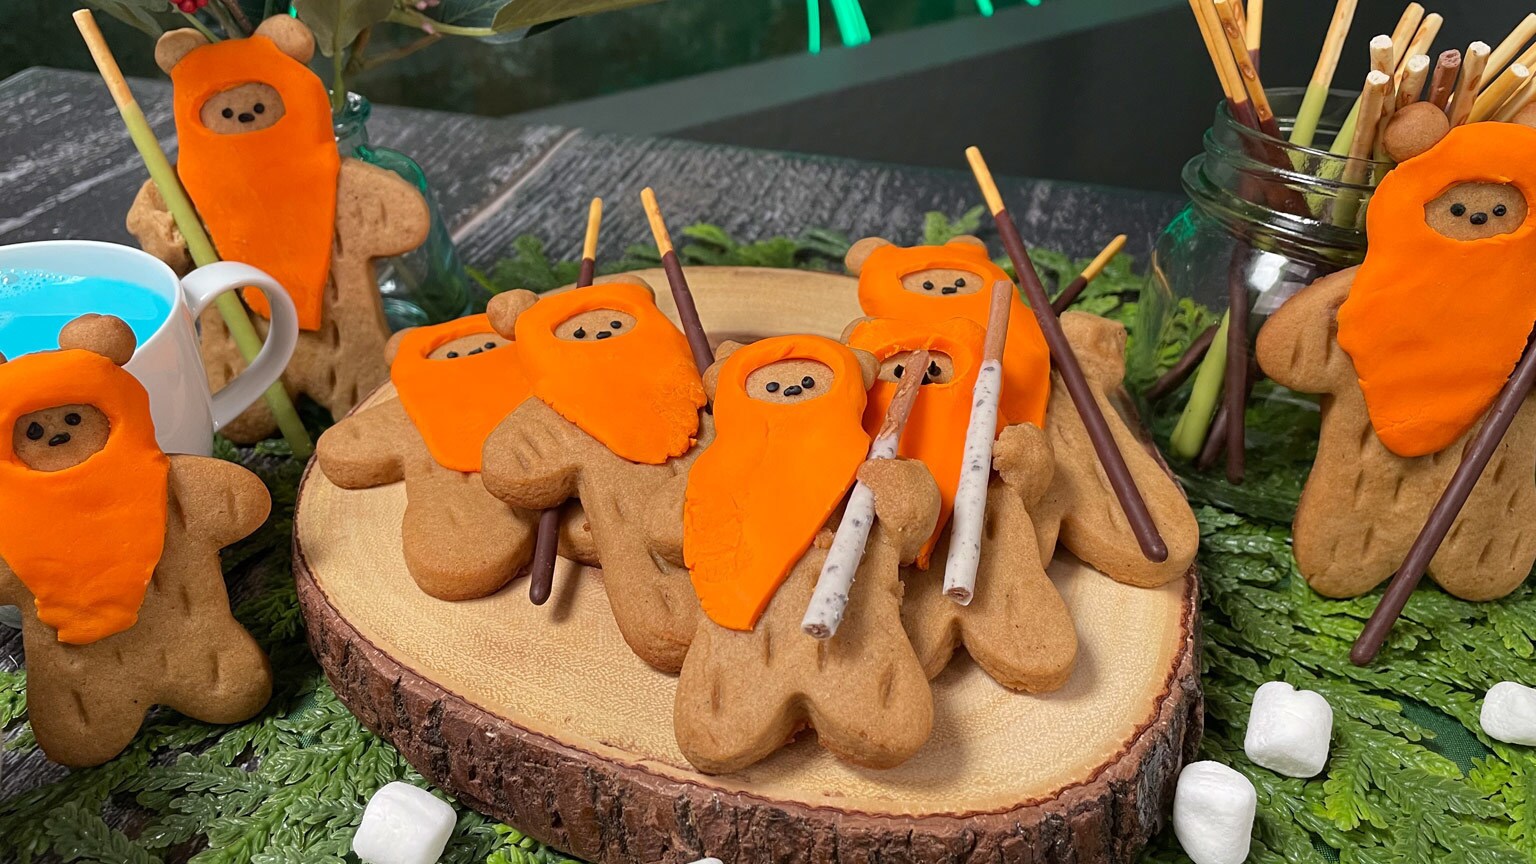 Yub Nub! Get the Recipe for Ewok Gingerbread Cookies